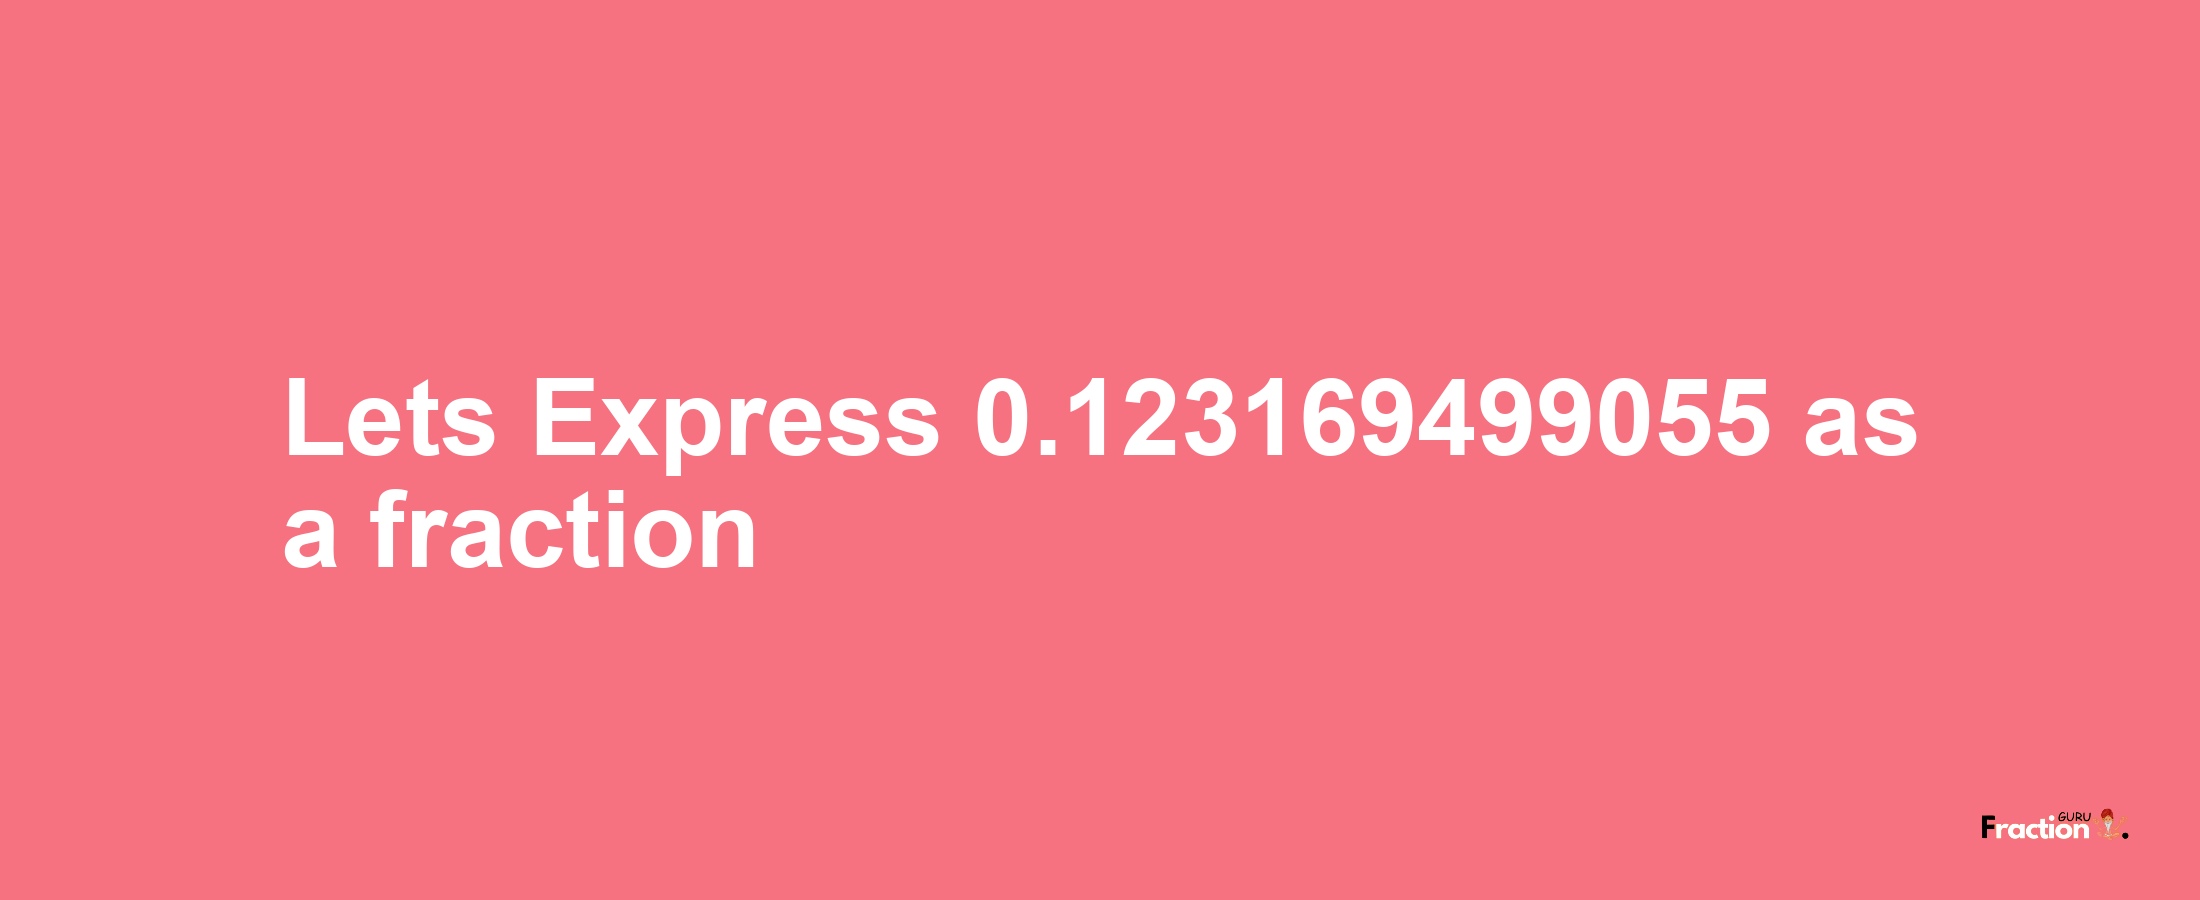 Lets Express 0.123169499055 as afraction